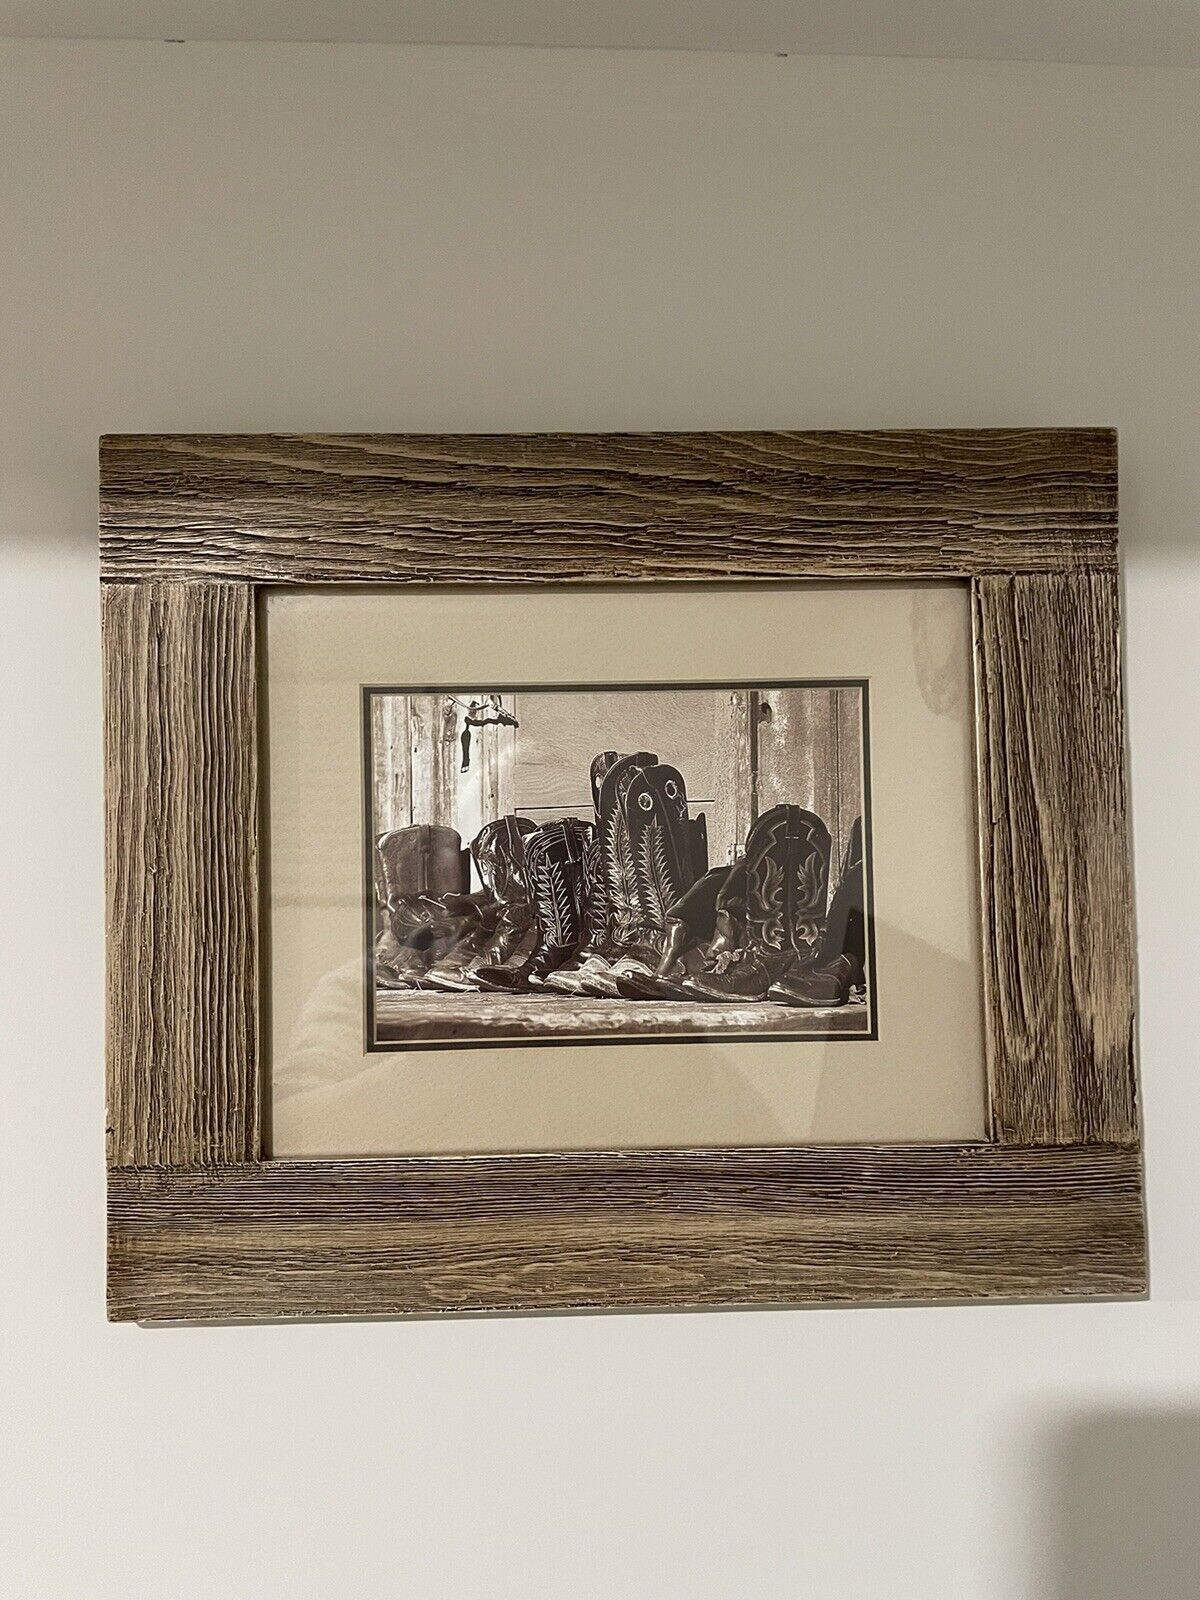 Western Cowboy Boots Wall Picture Honey Wood Framed and Matted 13.5 x 11.5